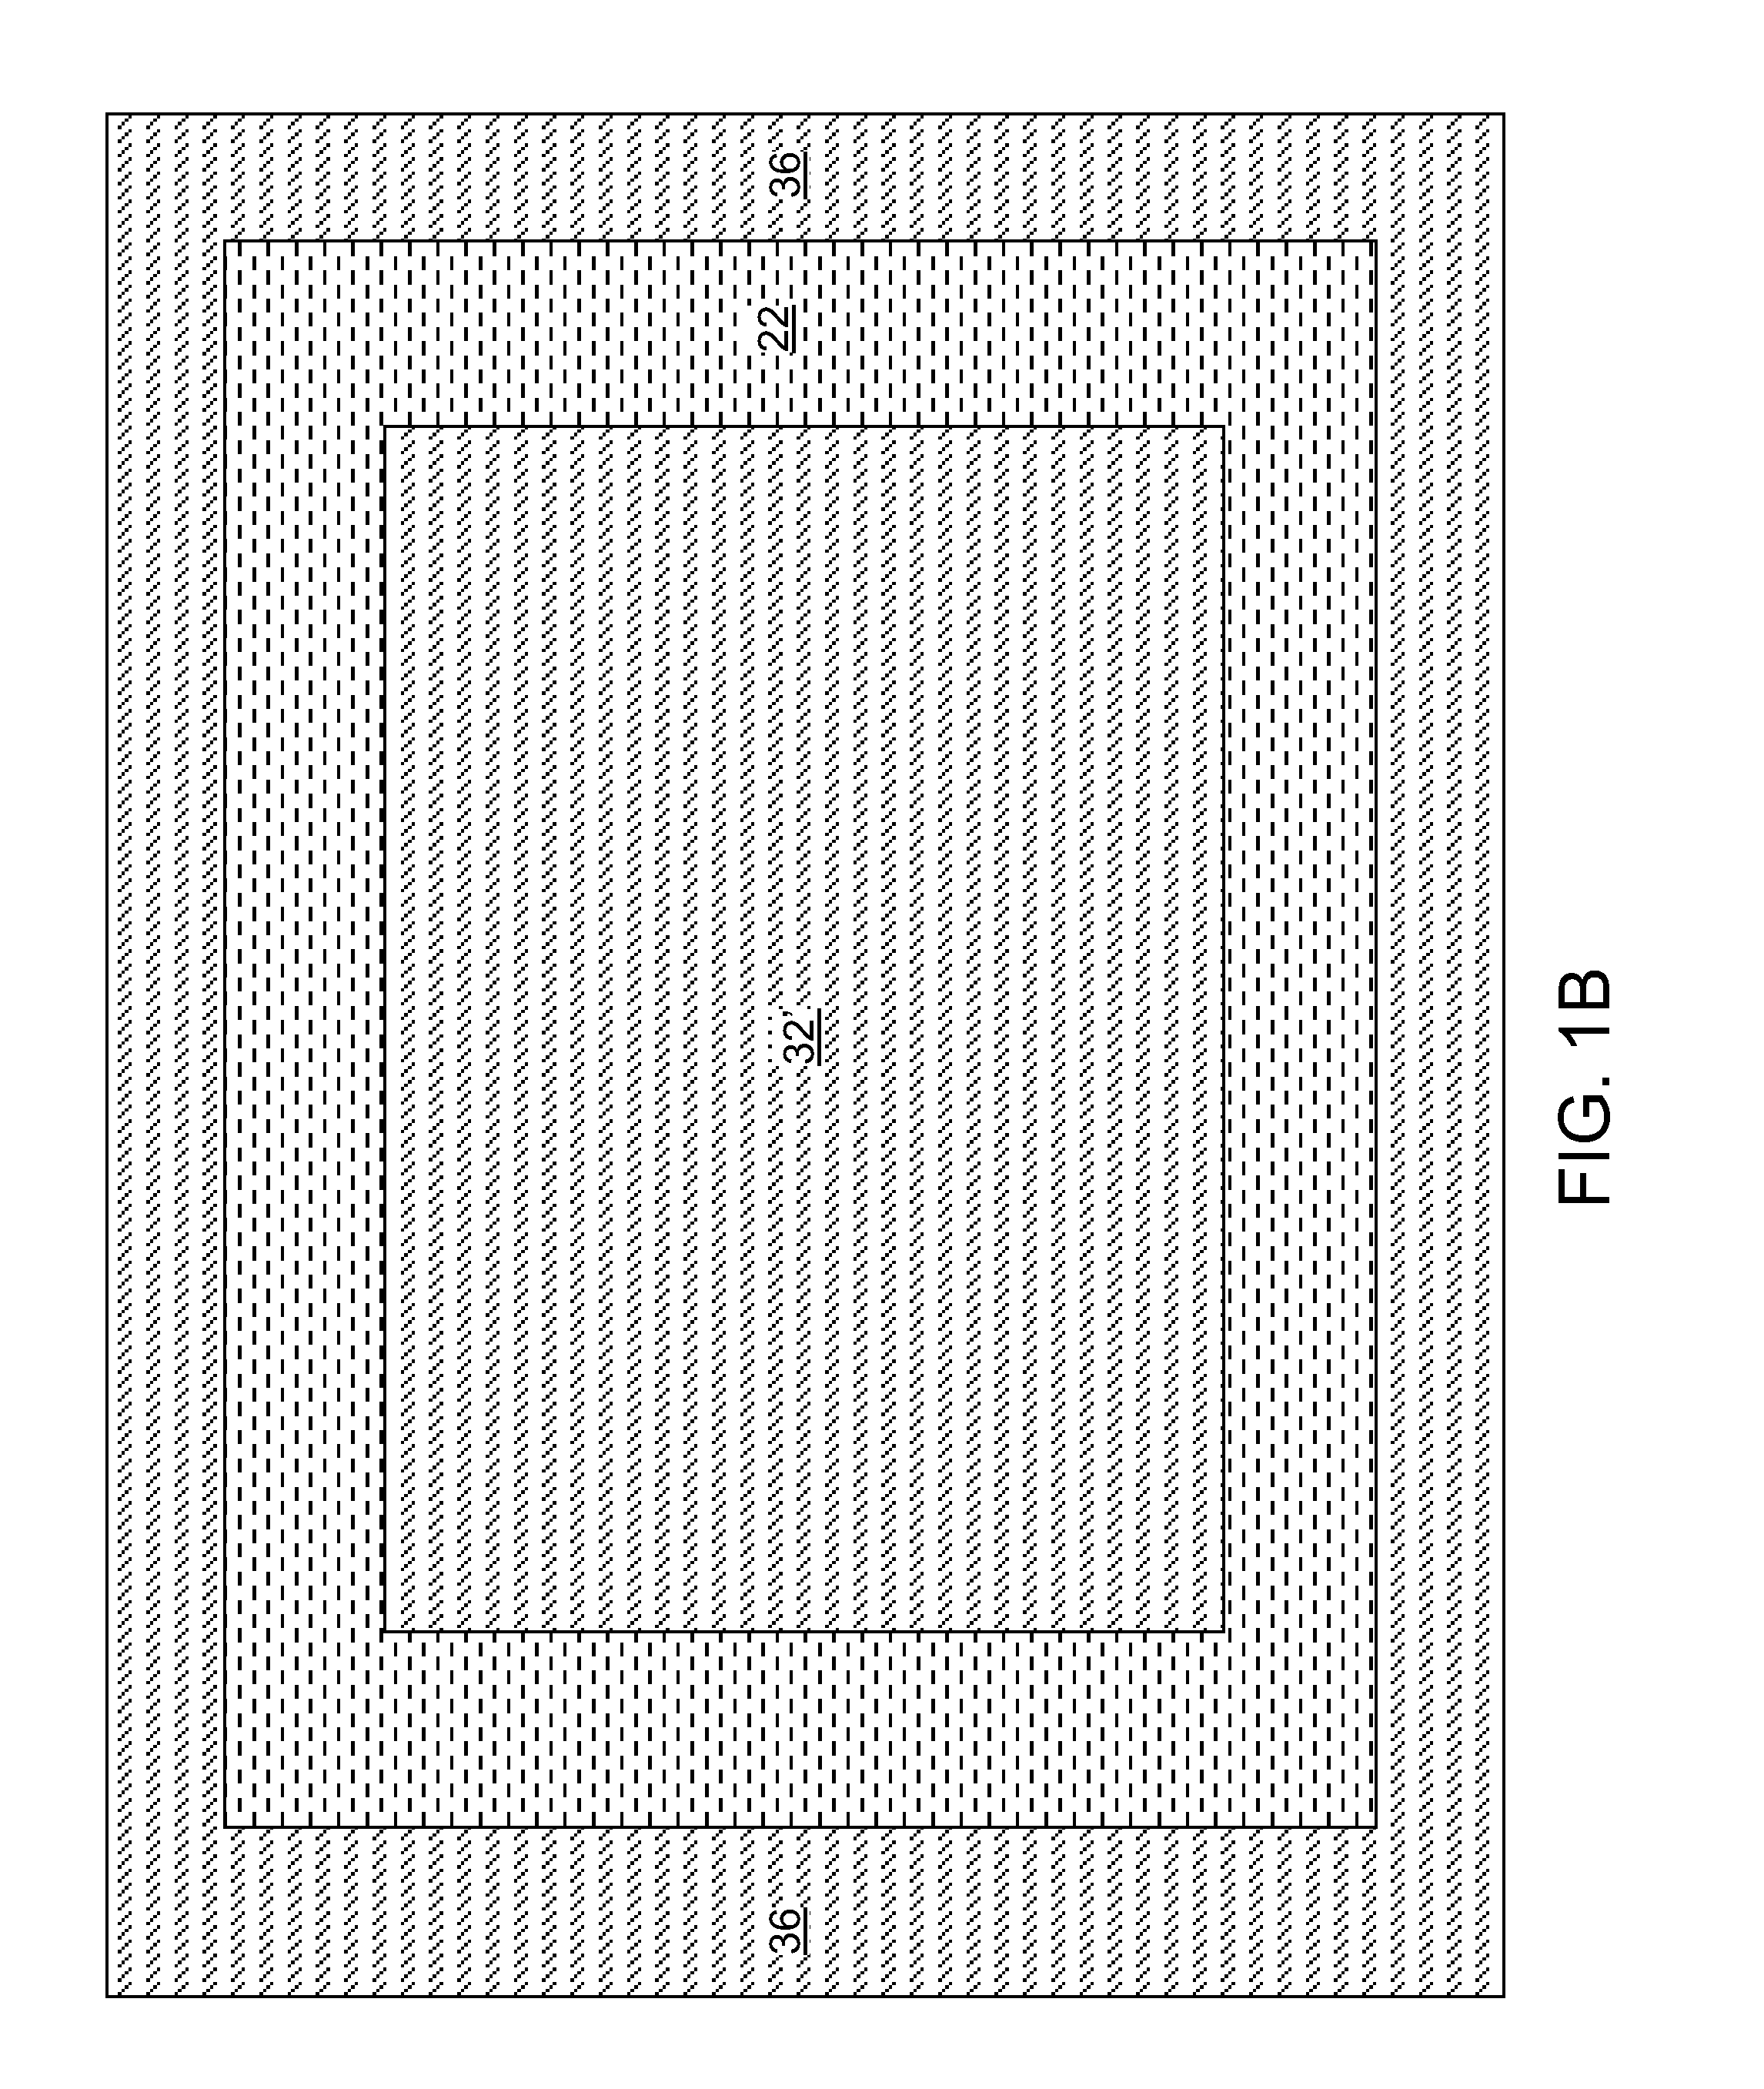 Recessed Single Crystalline Source and Drain For Semiconductor-On-Insulator Devices